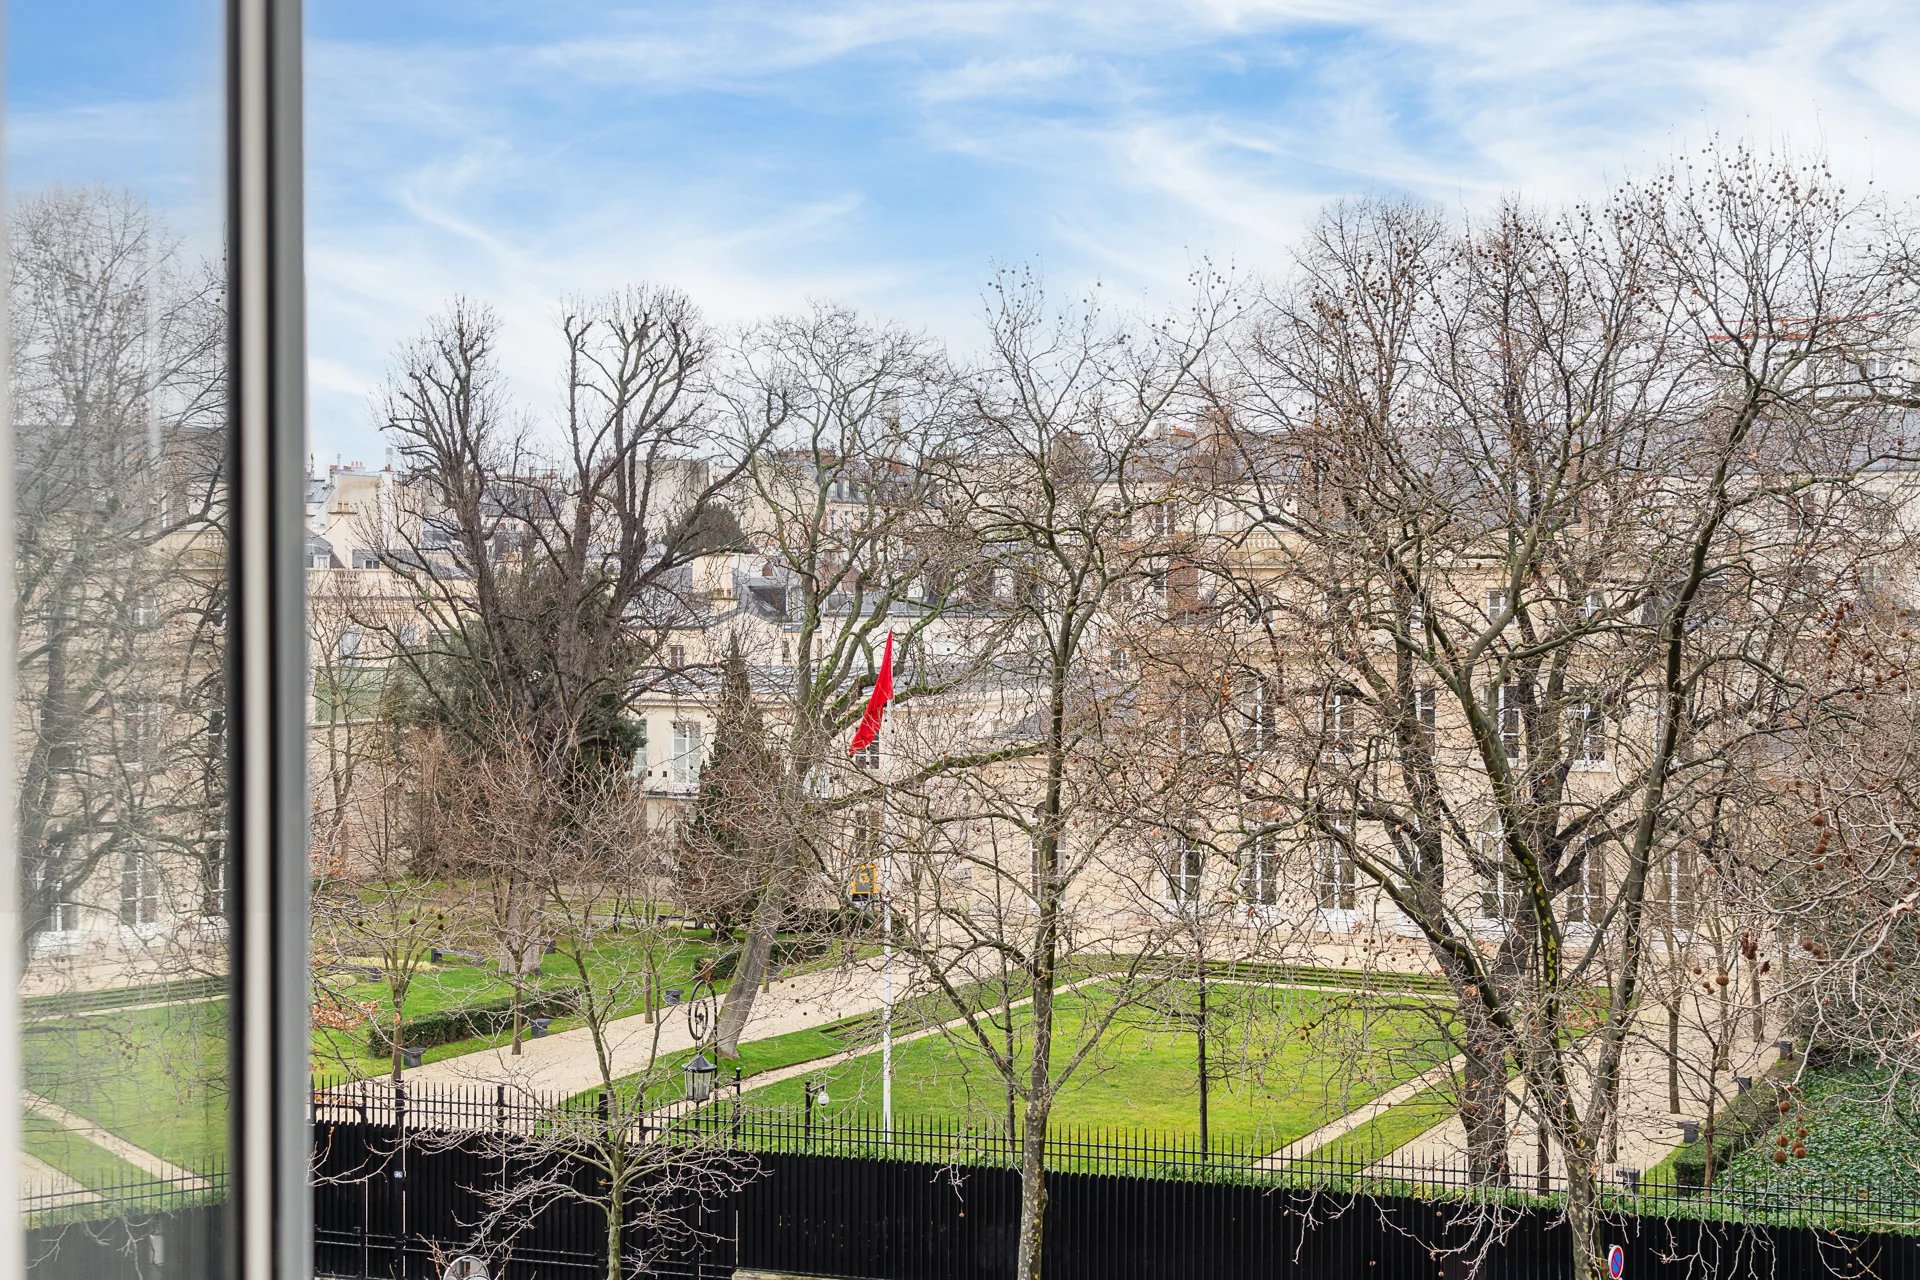 Apartment for sale - Invalides - 75007 - 4 bedrooms - 243 sq.m (2,616 sq ft)